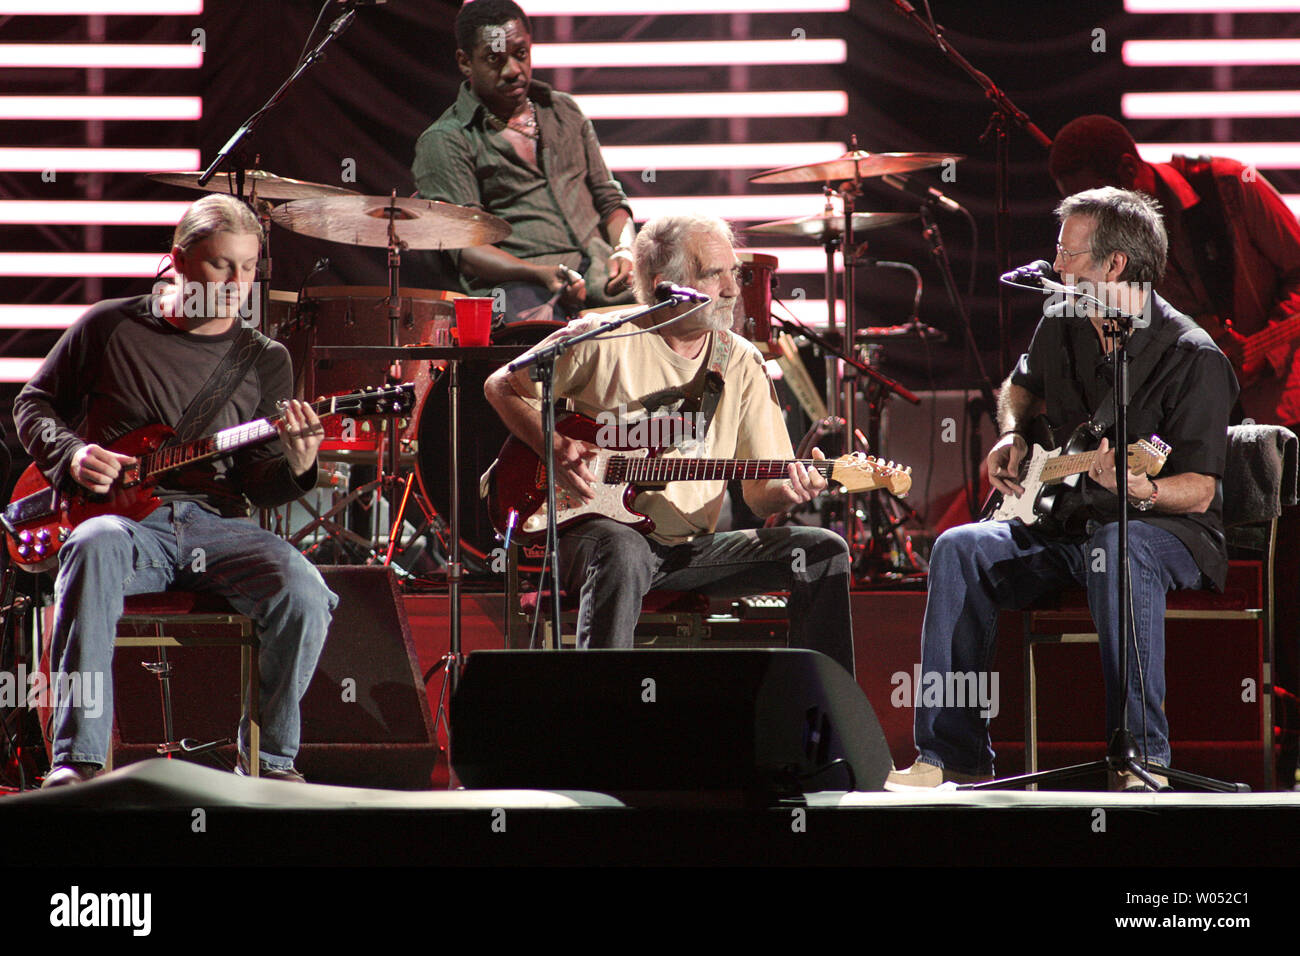 Derek Trucks, drummer Steve Jordan, J.J. Cale, Eric Clapton, and Willie Weeks (L-R) perform in concert at the ipayOne Center in San Diego on March 15, 2007.   (UPI Photo/Roger Williams) Stock Photo